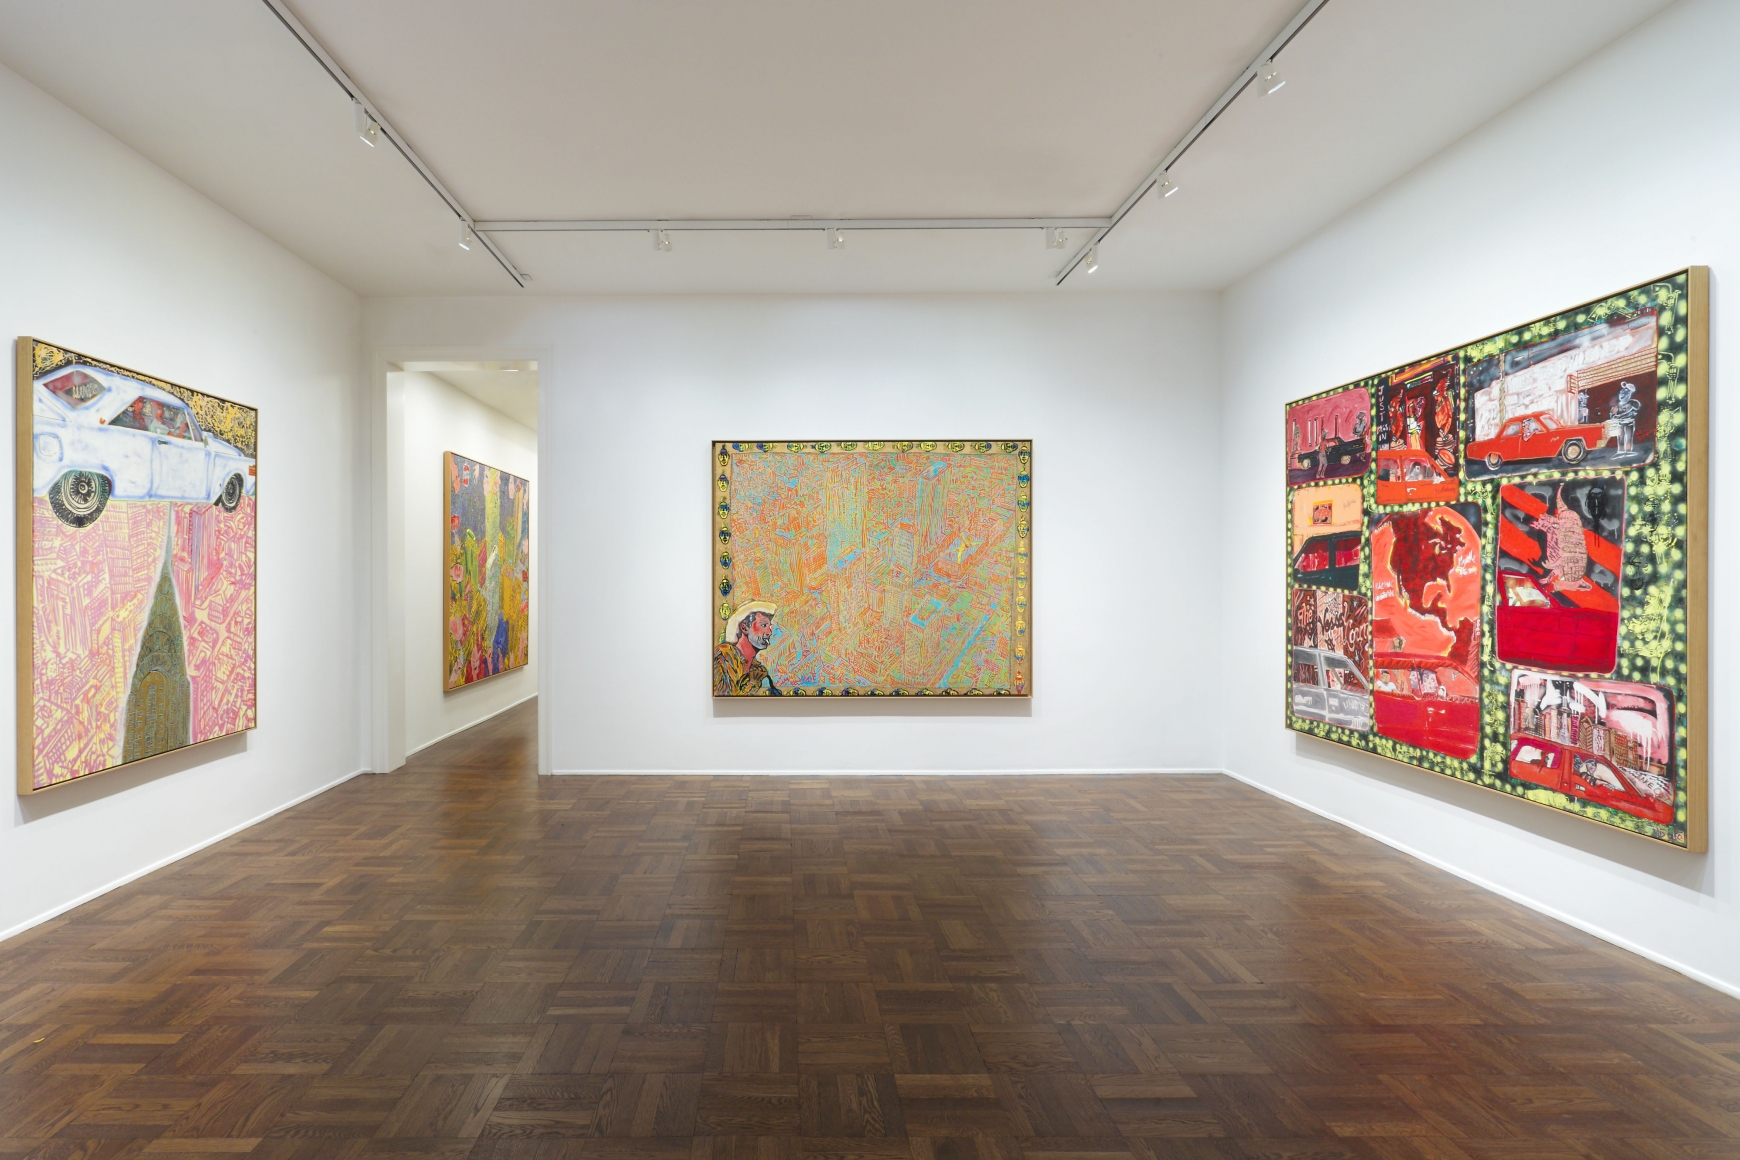 PETER DOIG Early Works 6 November 2013 through 3 January 2014 UPPER EAST SIDE, NEW YORK, Installation View 1